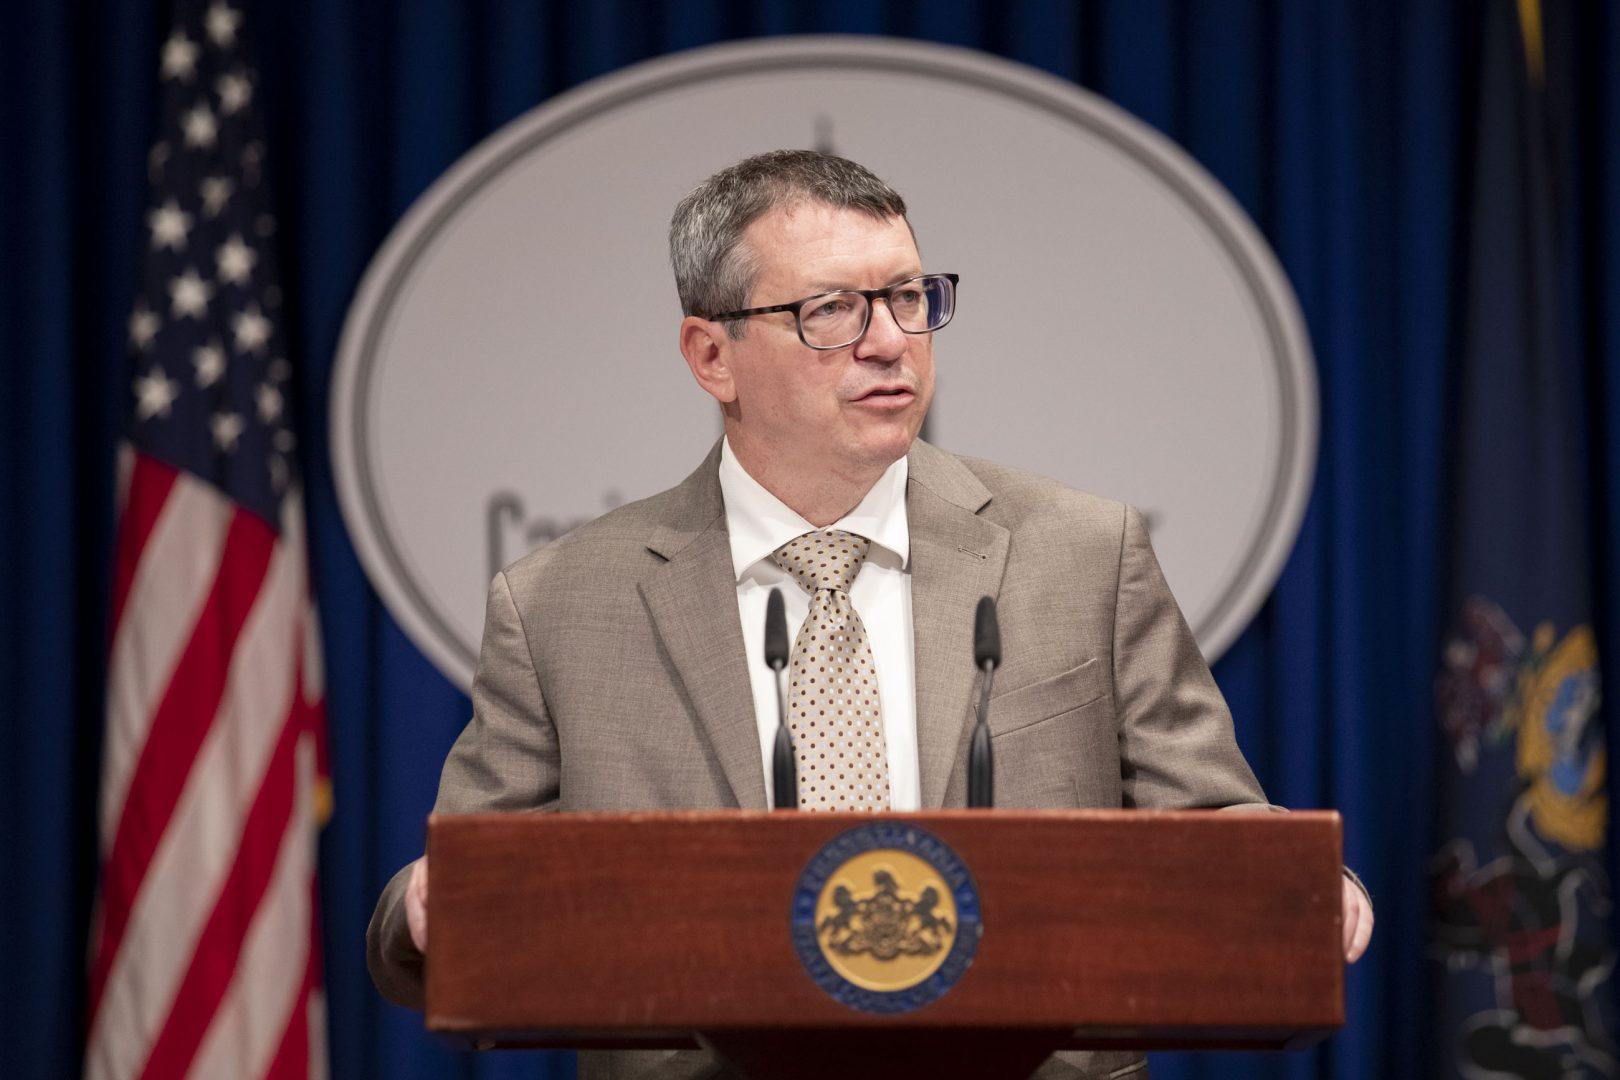 Pennsylvania Department of Environmental Protection (DEP) Secretary Patrick McDonnell announces the expansion of the Local Climate Action Training to 121 more municipalities, in Harrisburg, PA on May 11, 2022.